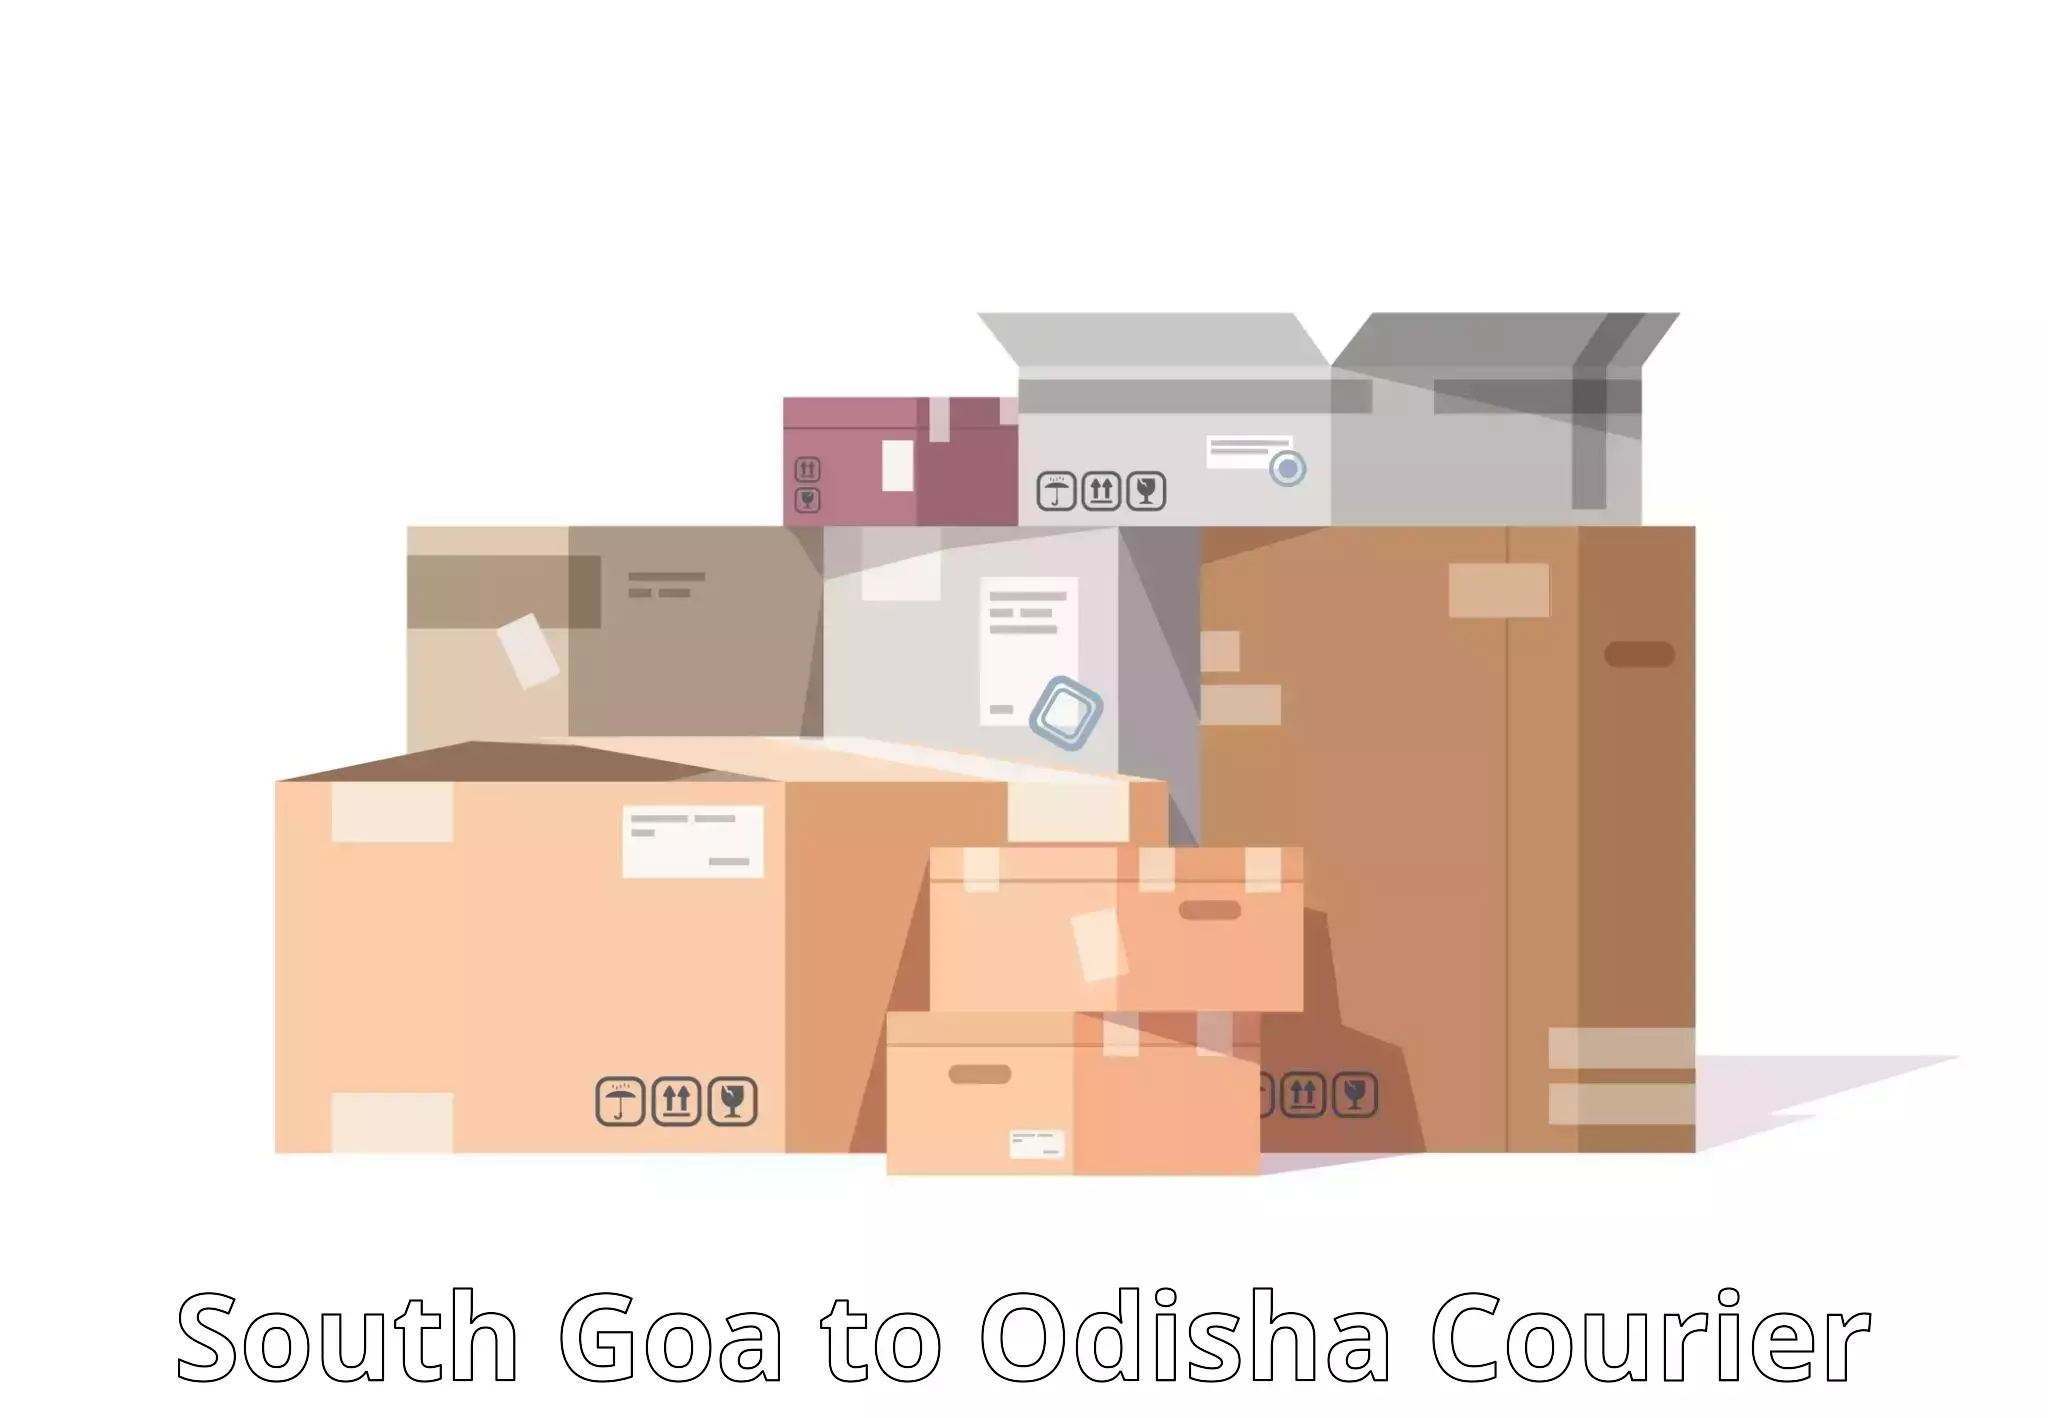 24/7 courier service South Goa to Pipili